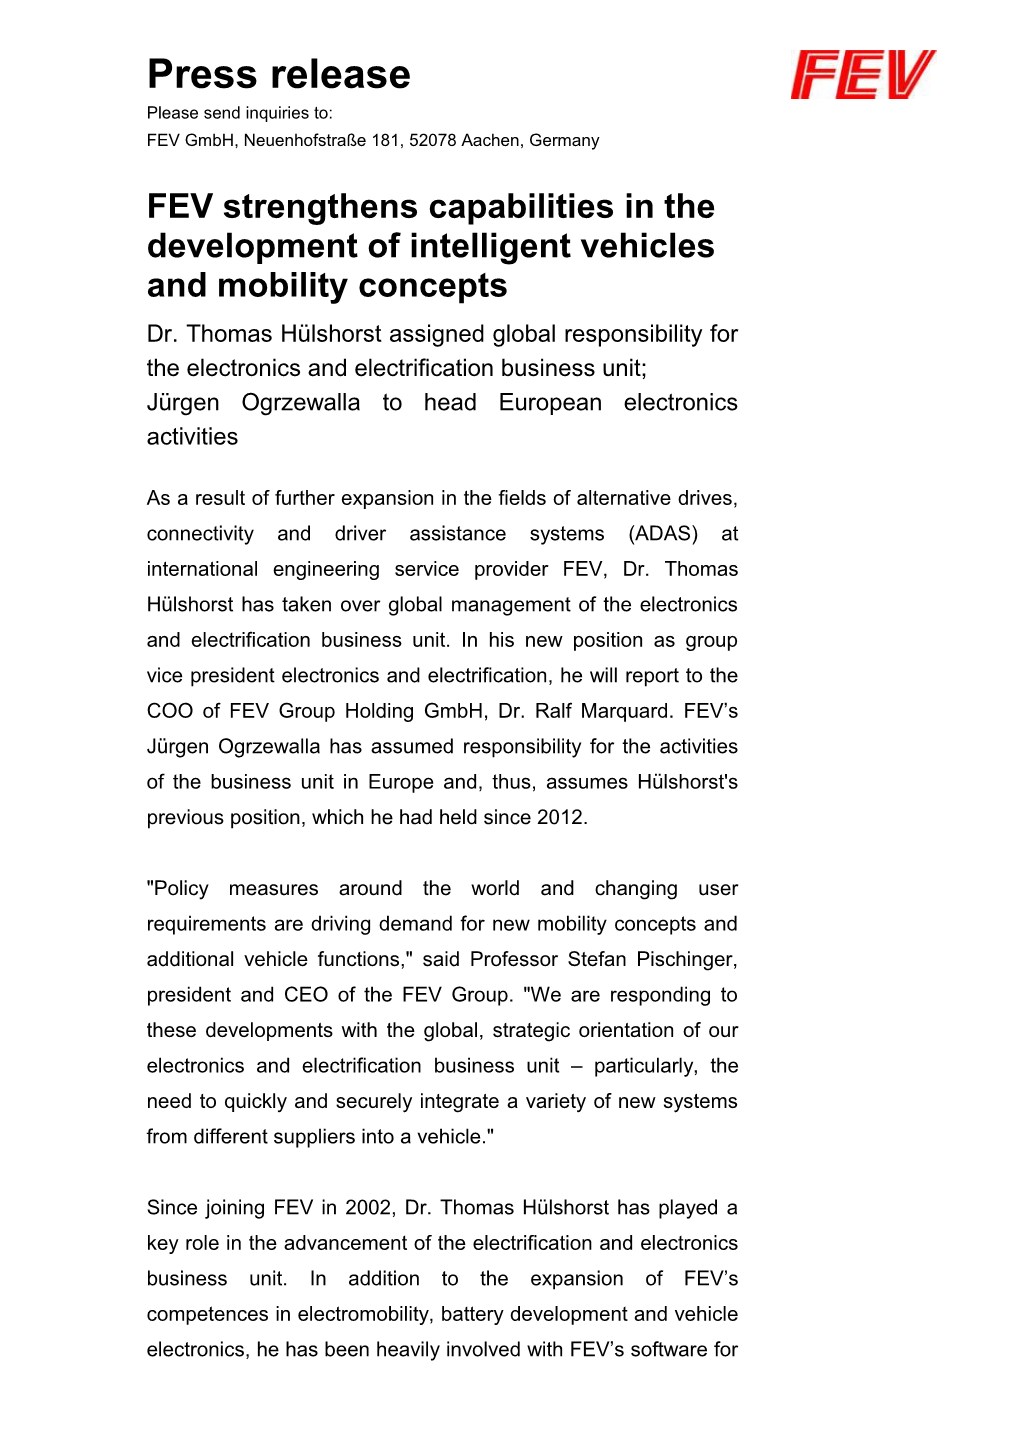 FEV Strengthens Capabilities in the Development of Intelligent Vehicles and Mobility Concepts